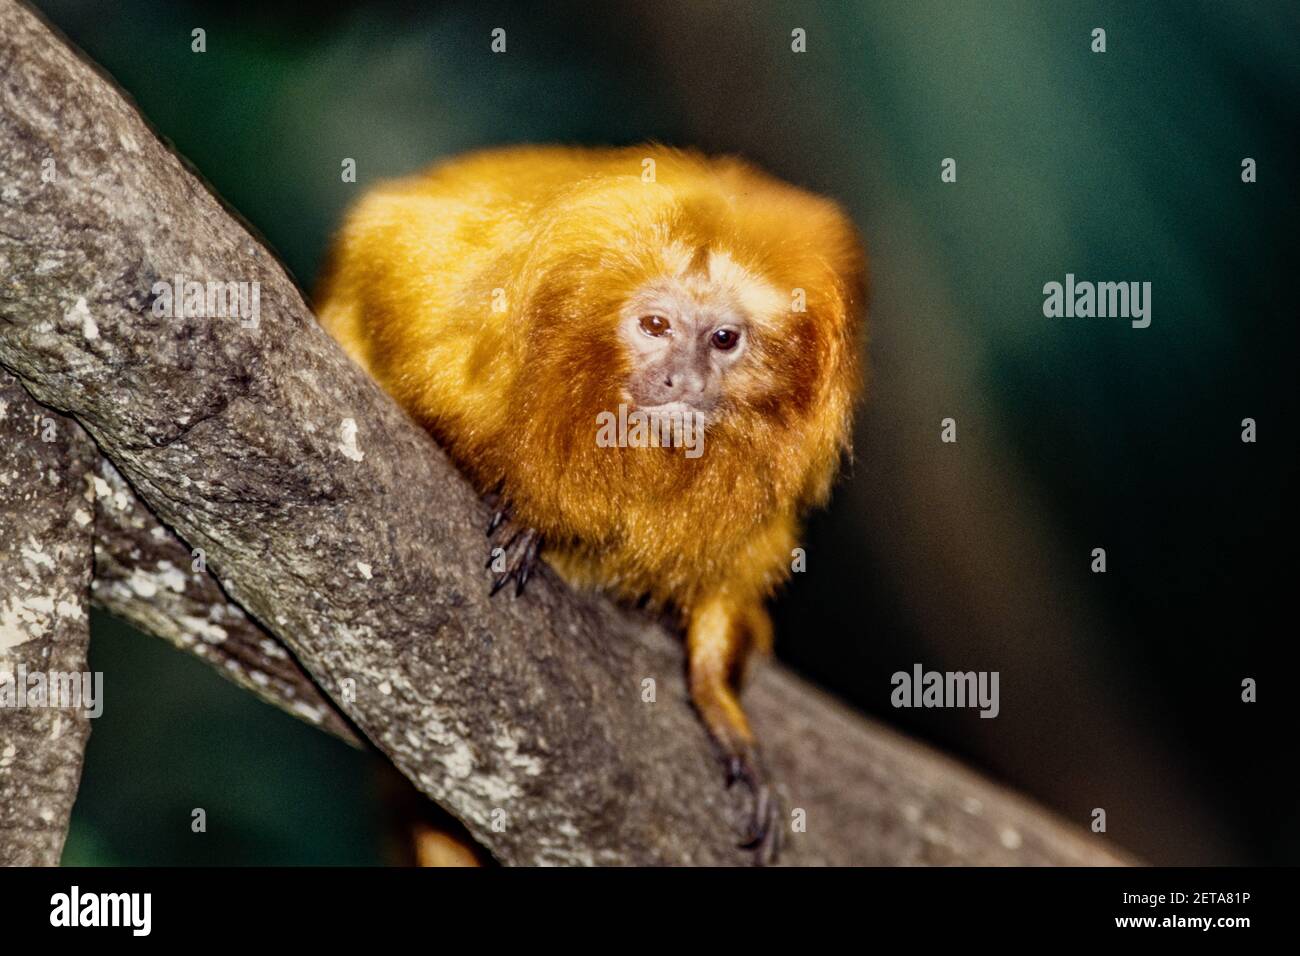 The Golden Lion Tamarin or Golden Marmoset - Leontopithecus rosalia, is a tiny, squirrel-sized monkey. They are endemic to Brazil. Stock Photo